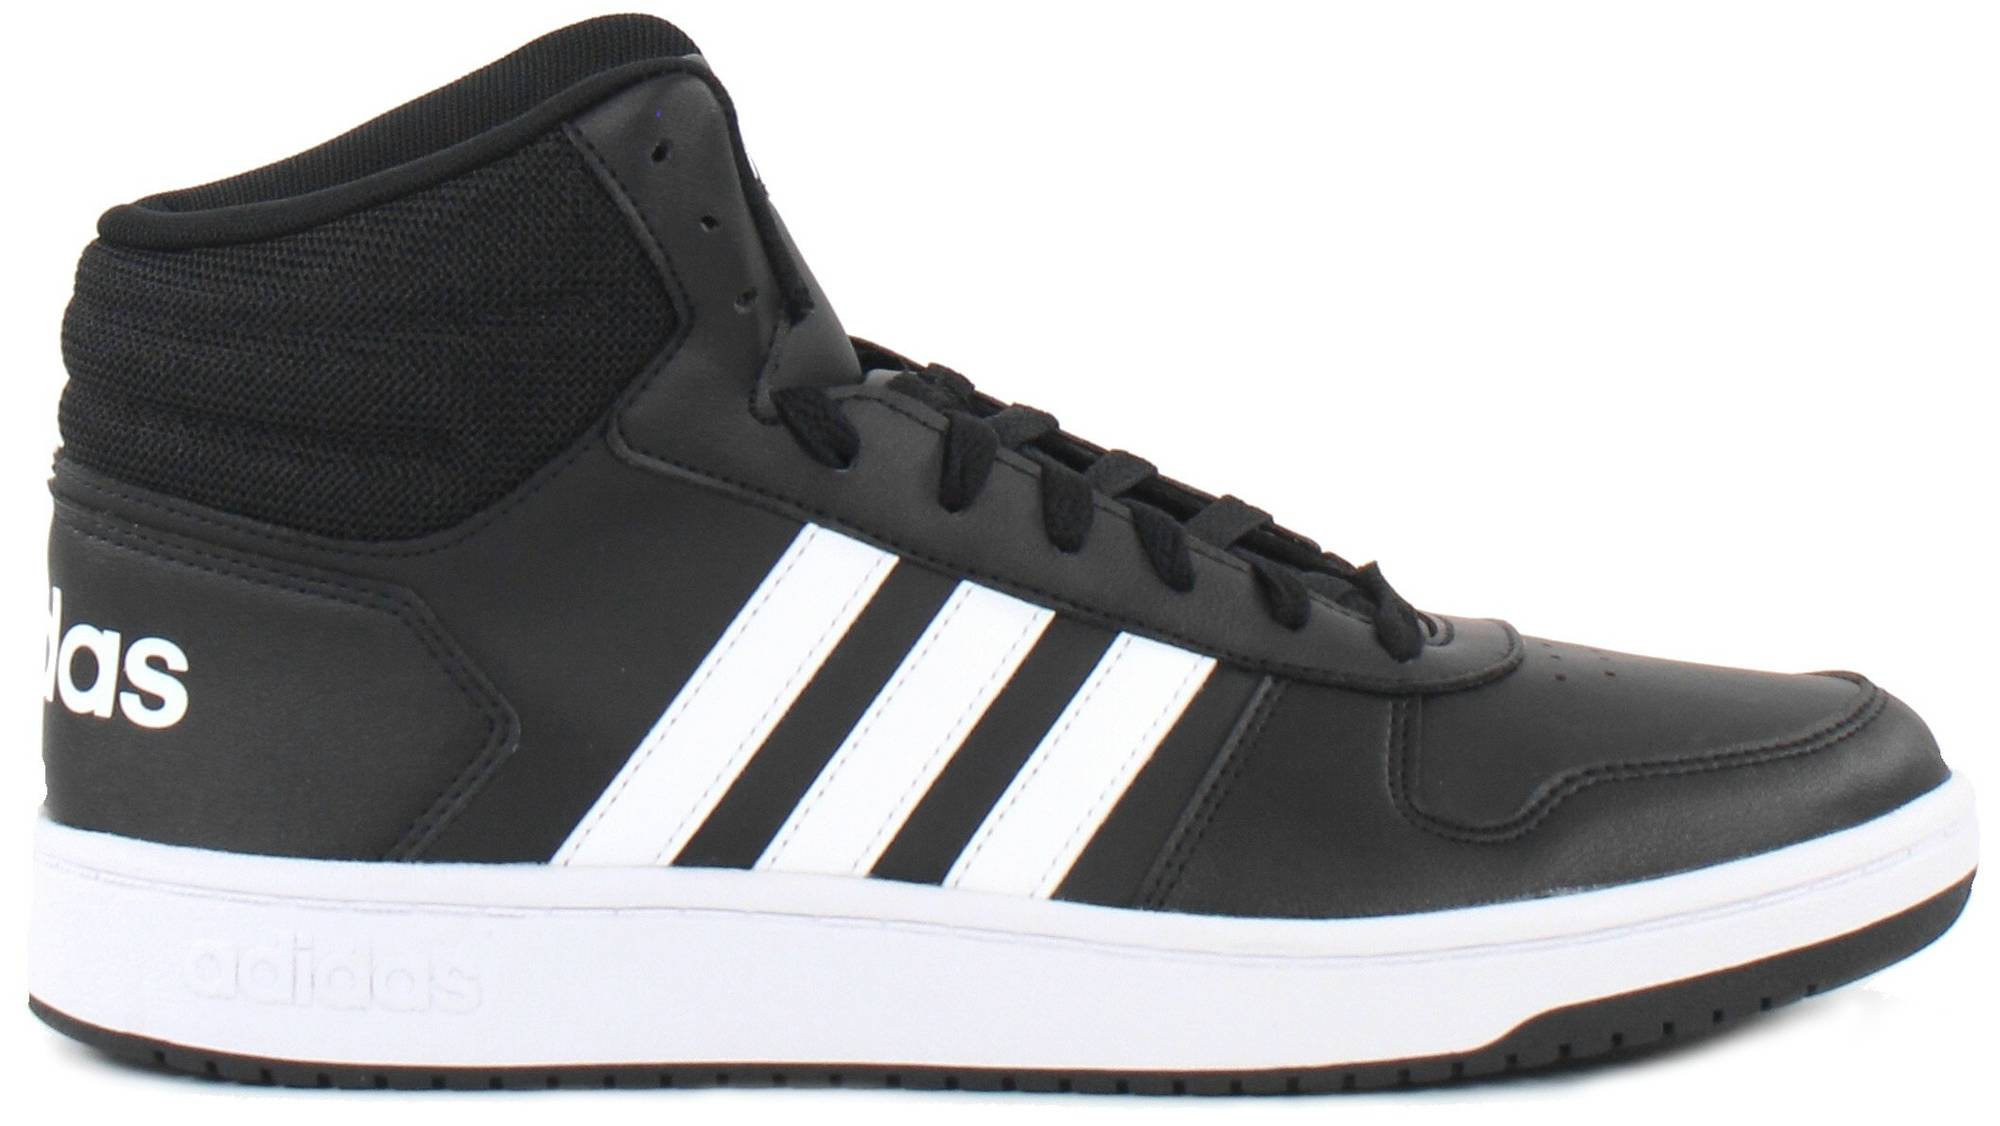 adidas hoops 2.0 black and white